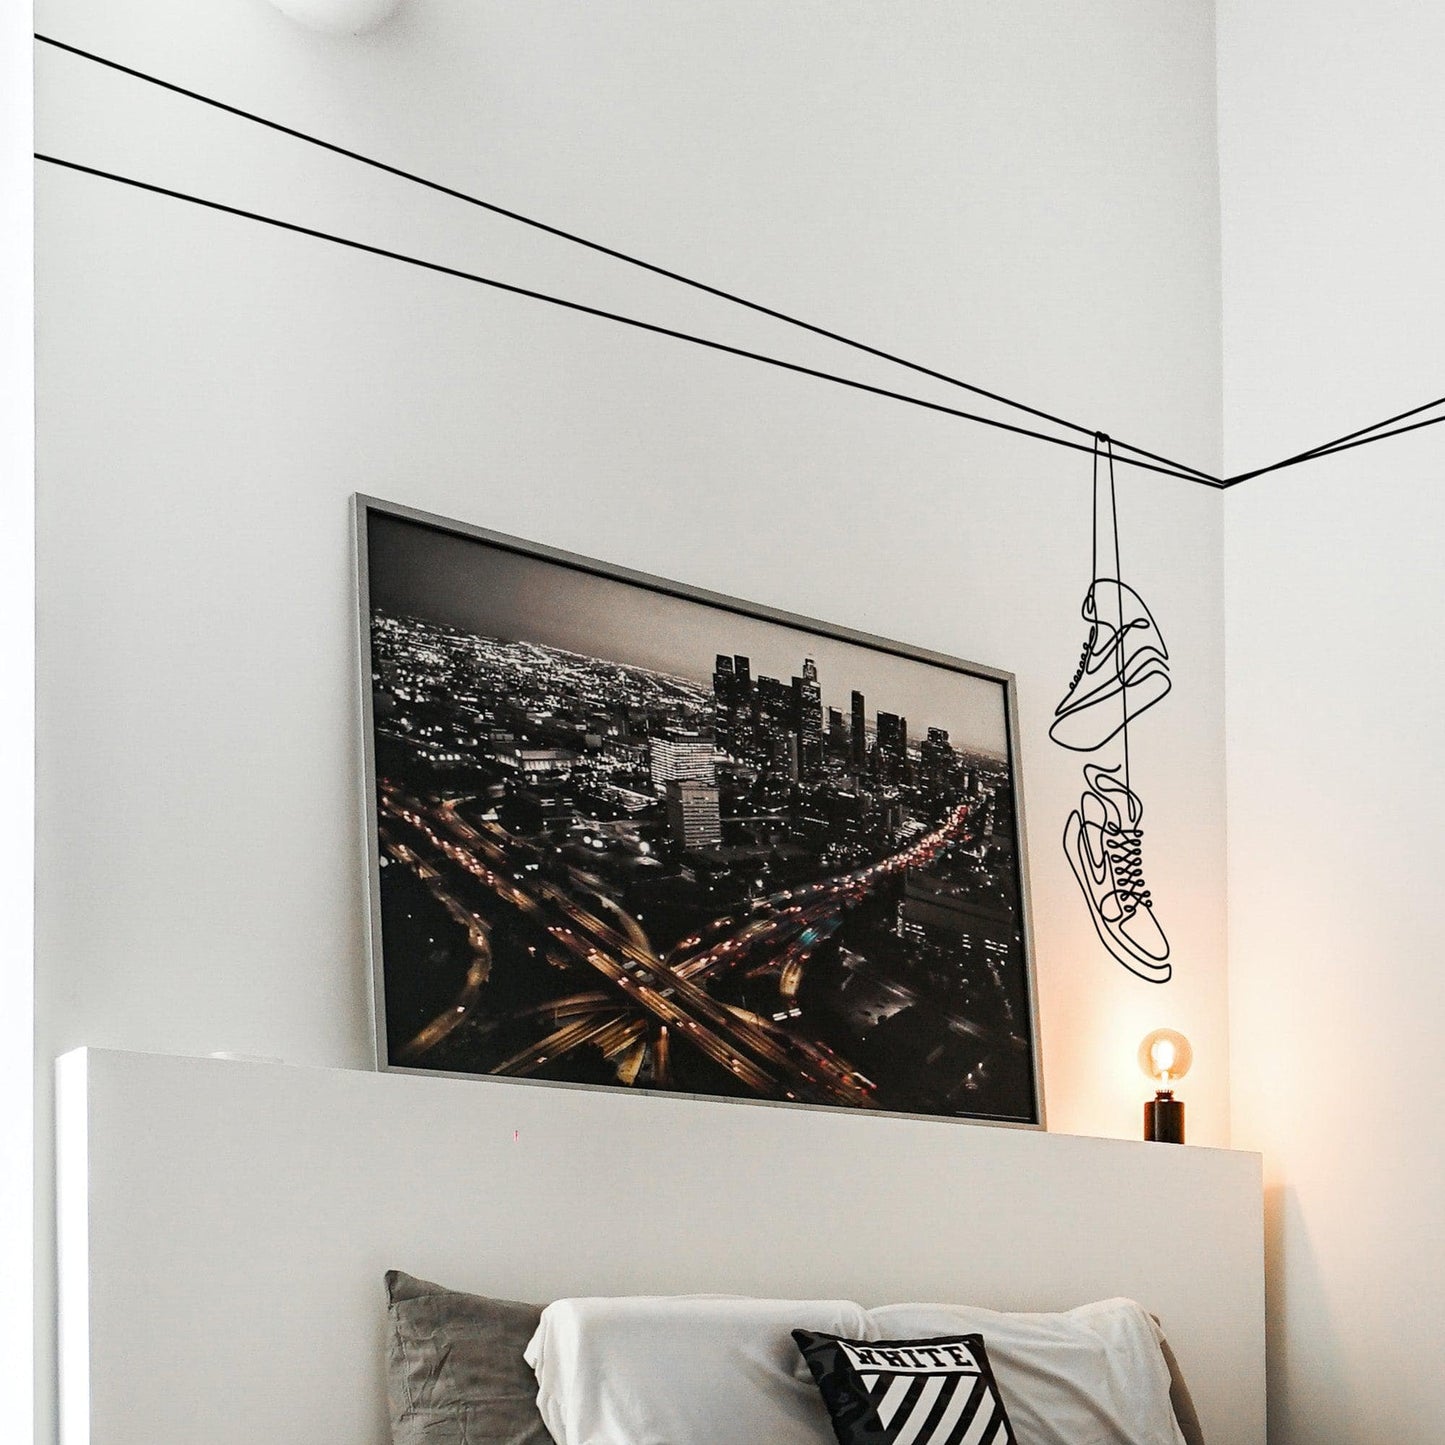 Shoes On Wire Wall Decal Sticker. NYC, Urban Theme Decor. #6750